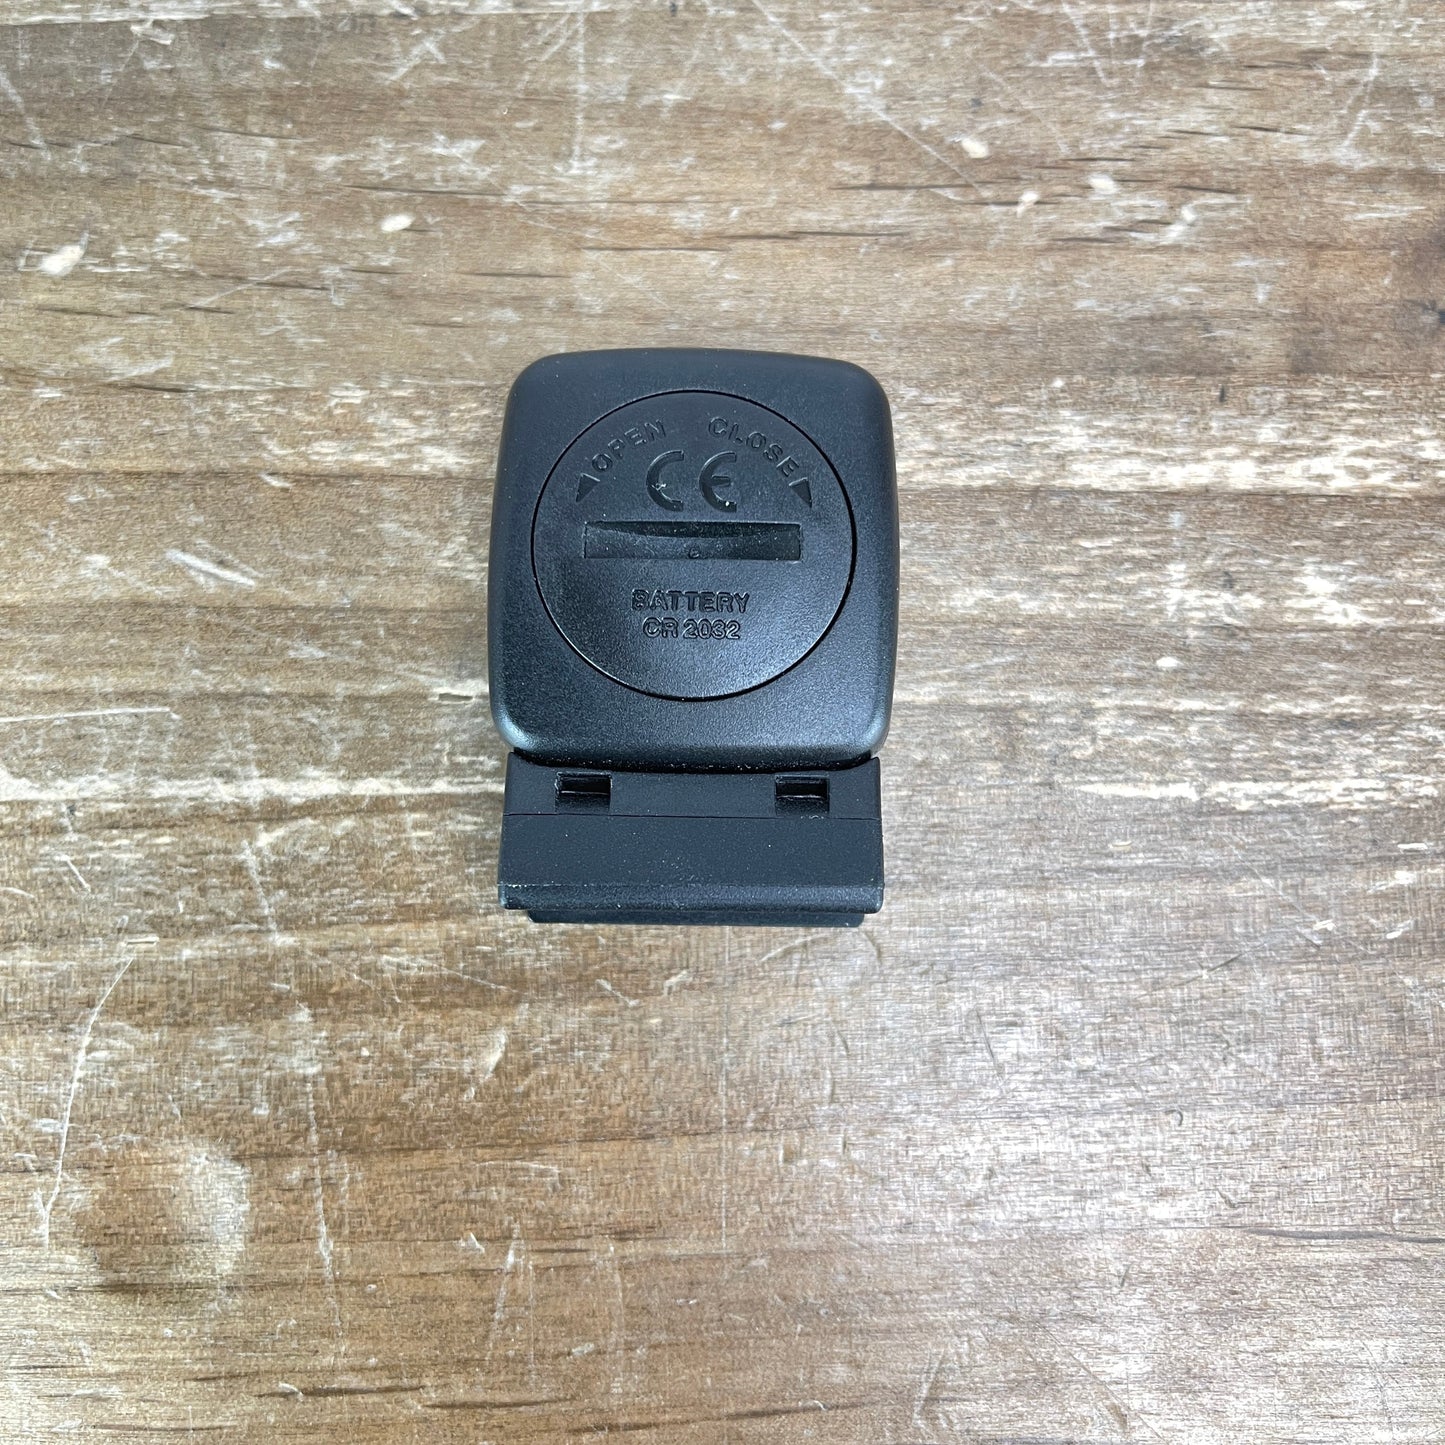 CycleOps Speed or Cadence Bicycle Wireless Sensor